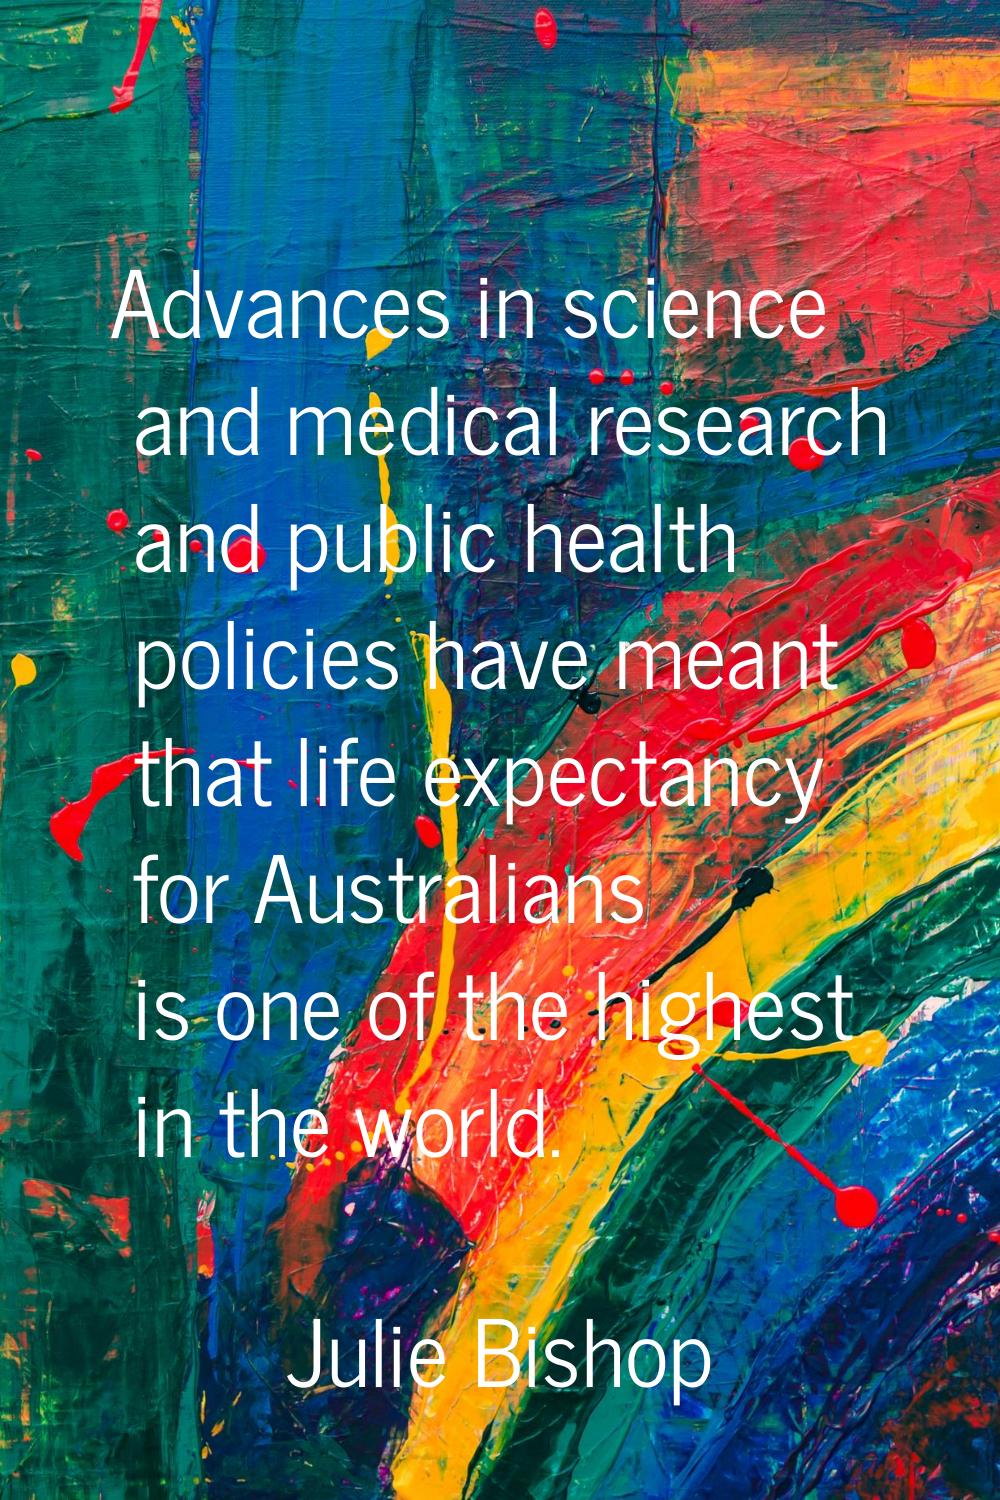 Advances in science and medical research and public health policies have meant that life expectancy